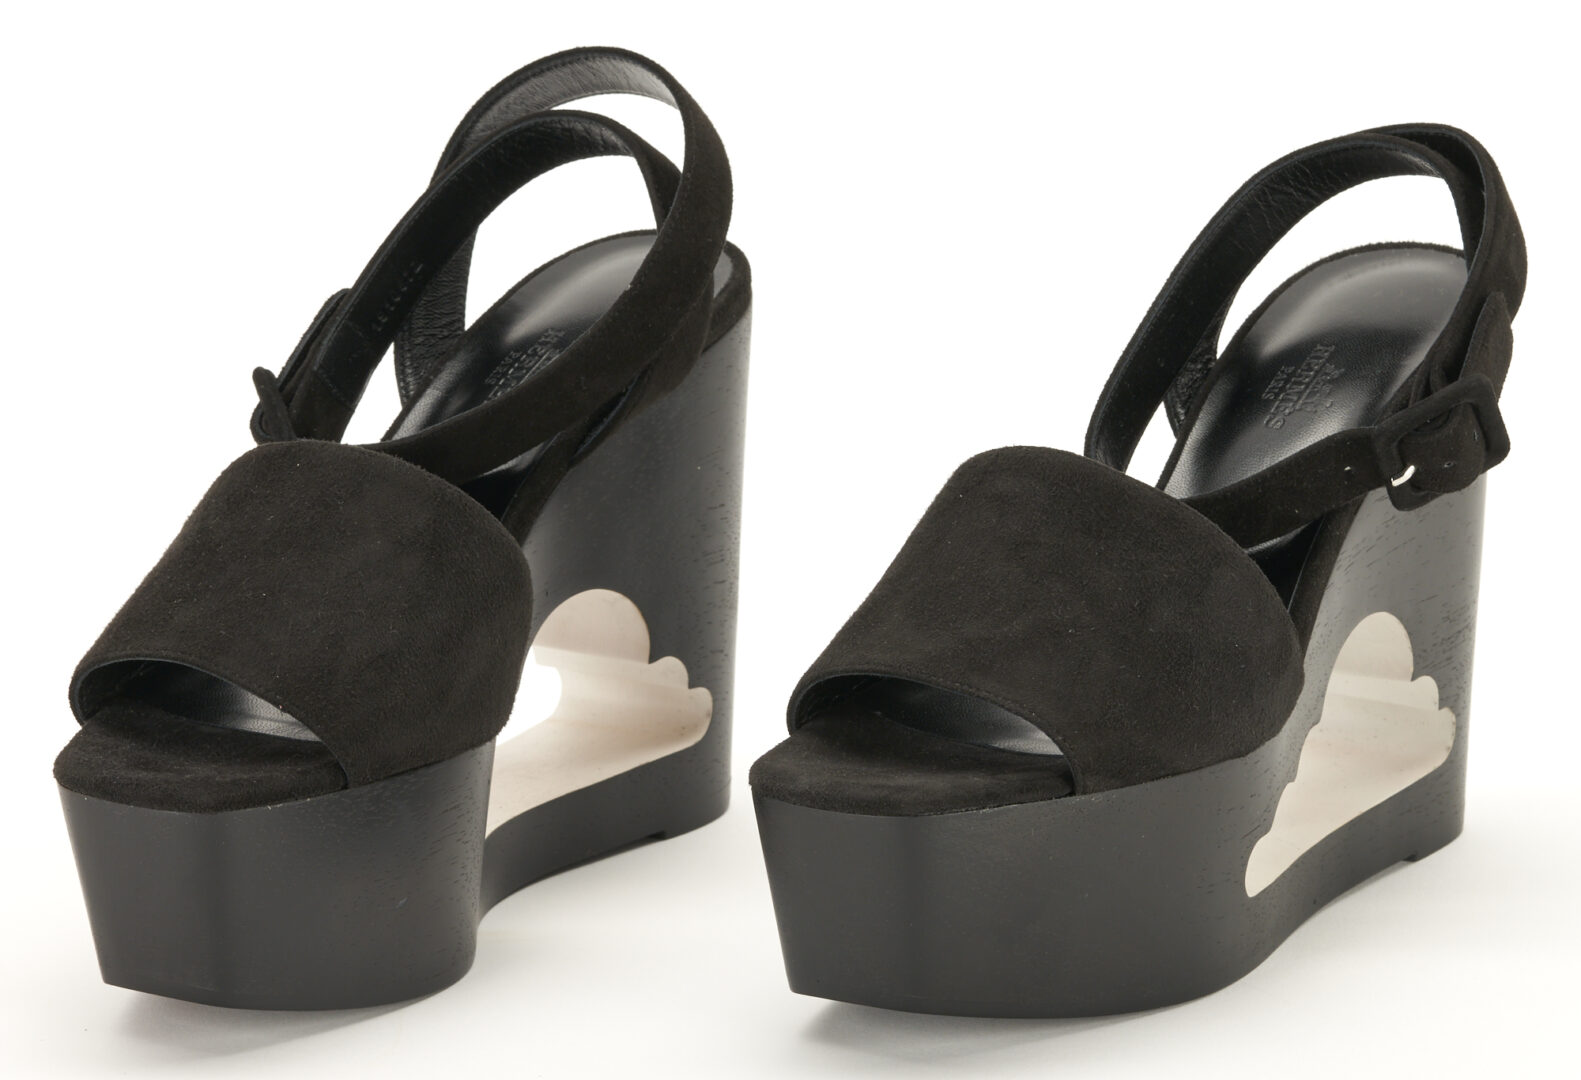 Lot 1171: 2 Pairs Limited Edition Hermes Heels, incl. Cloud Sandal